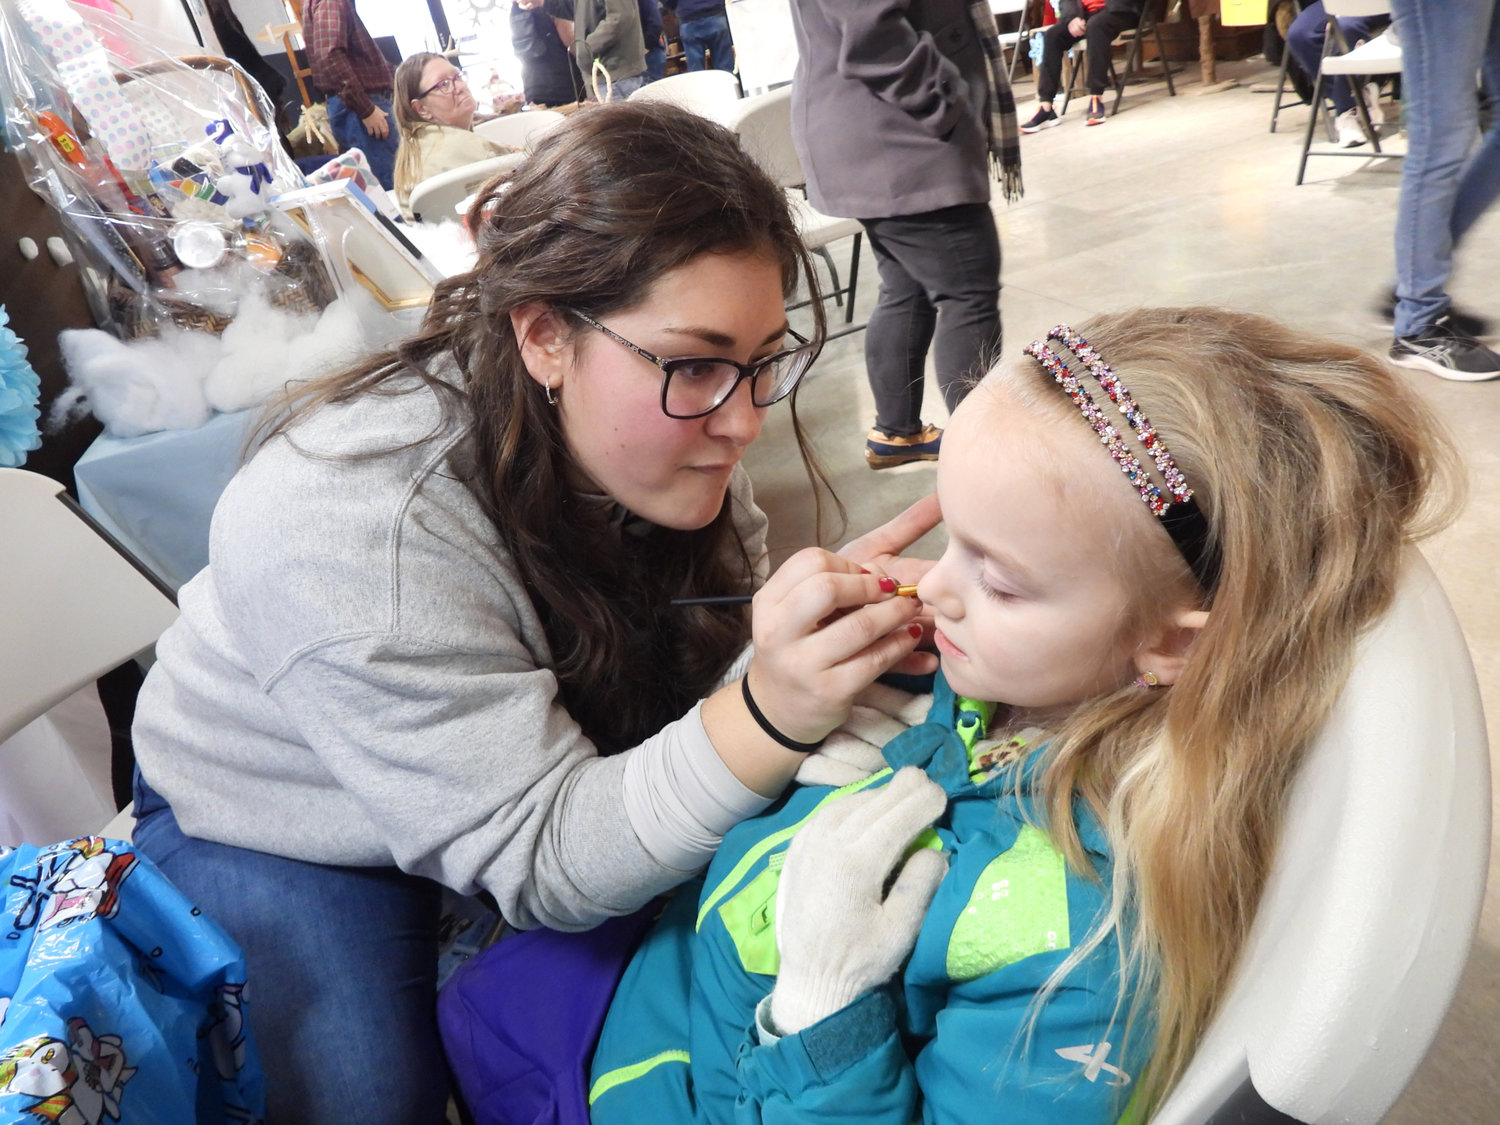 GSC Environmental Educator Gina Sciarra paints the face of a child at the Great Swamp Conservancy's Winter Hibernation Festival on Saturday, Feb, 18